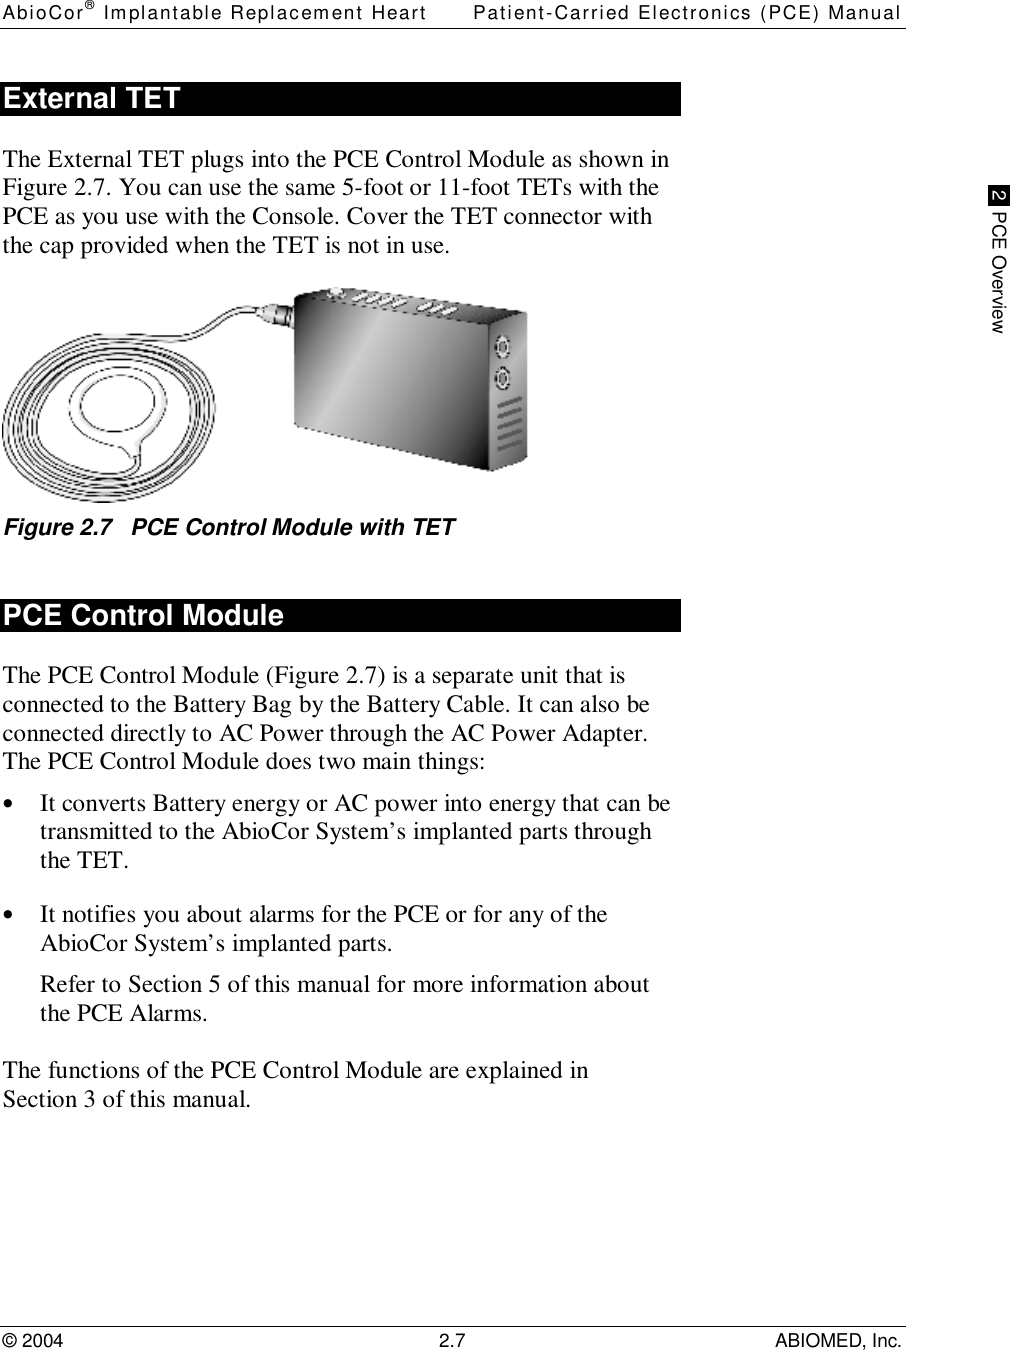 AbioCor® Implantable Replacement Heart Patient-Carried Electronics (PCE) Manual© 2004 2.7 ABIOMED, Inc. 2  PCE OverviewExternal TETThe External TET plugs into the PCE Control Module as shown inFigure 2.7. You can use the same 5-foot or 11-foot TETs with thePCE as you use with the Console. Cover the TET connector withthe cap provided when the TET is not in use.Figure 2.7   PCE Control Module with TETPCE Control ModuleThe PCE Control Module (Figure 2.7) is a separate unit that isconnected to the Battery Bag by the Battery Cable. It can also beconnected directly to AC Power through the AC Power Adapter.The PCE Control Module does two main things:• It converts Battery energy or AC power into energy that can betransmitted to the AbioCor System’s implanted parts throughthe TET.• It notifies you about alarms for the PCE or for any of theAbioCor System’s implanted parts.Refer to Section 5 of this manual for more information aboutthe PCE Alarms.The functions of the PCE Control Module are explained inSection 3 of this manual.